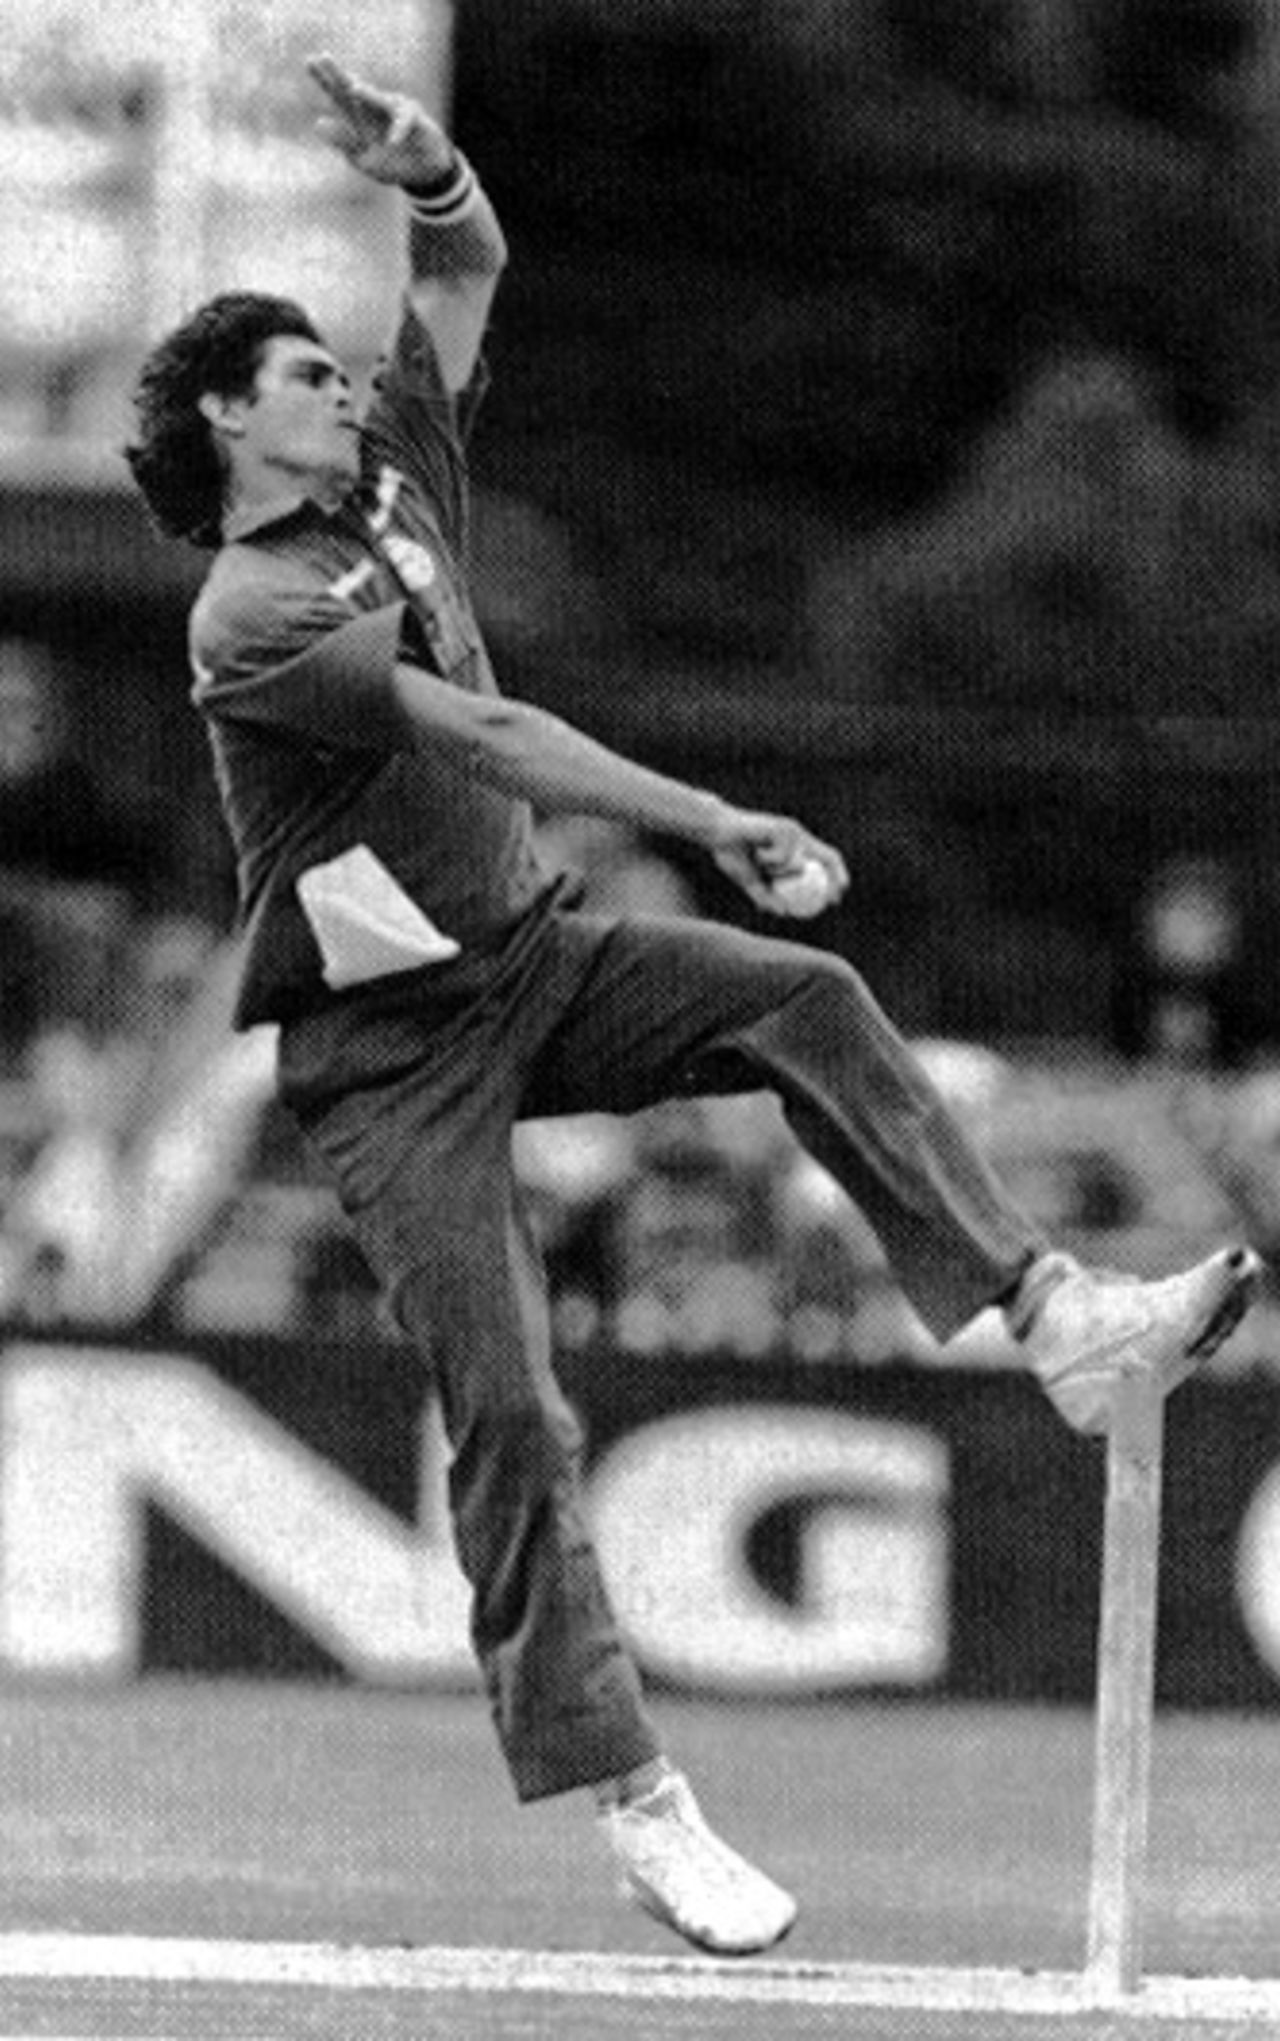 Meyrick Pringle in his delivery stride, South Africa, 1991-92